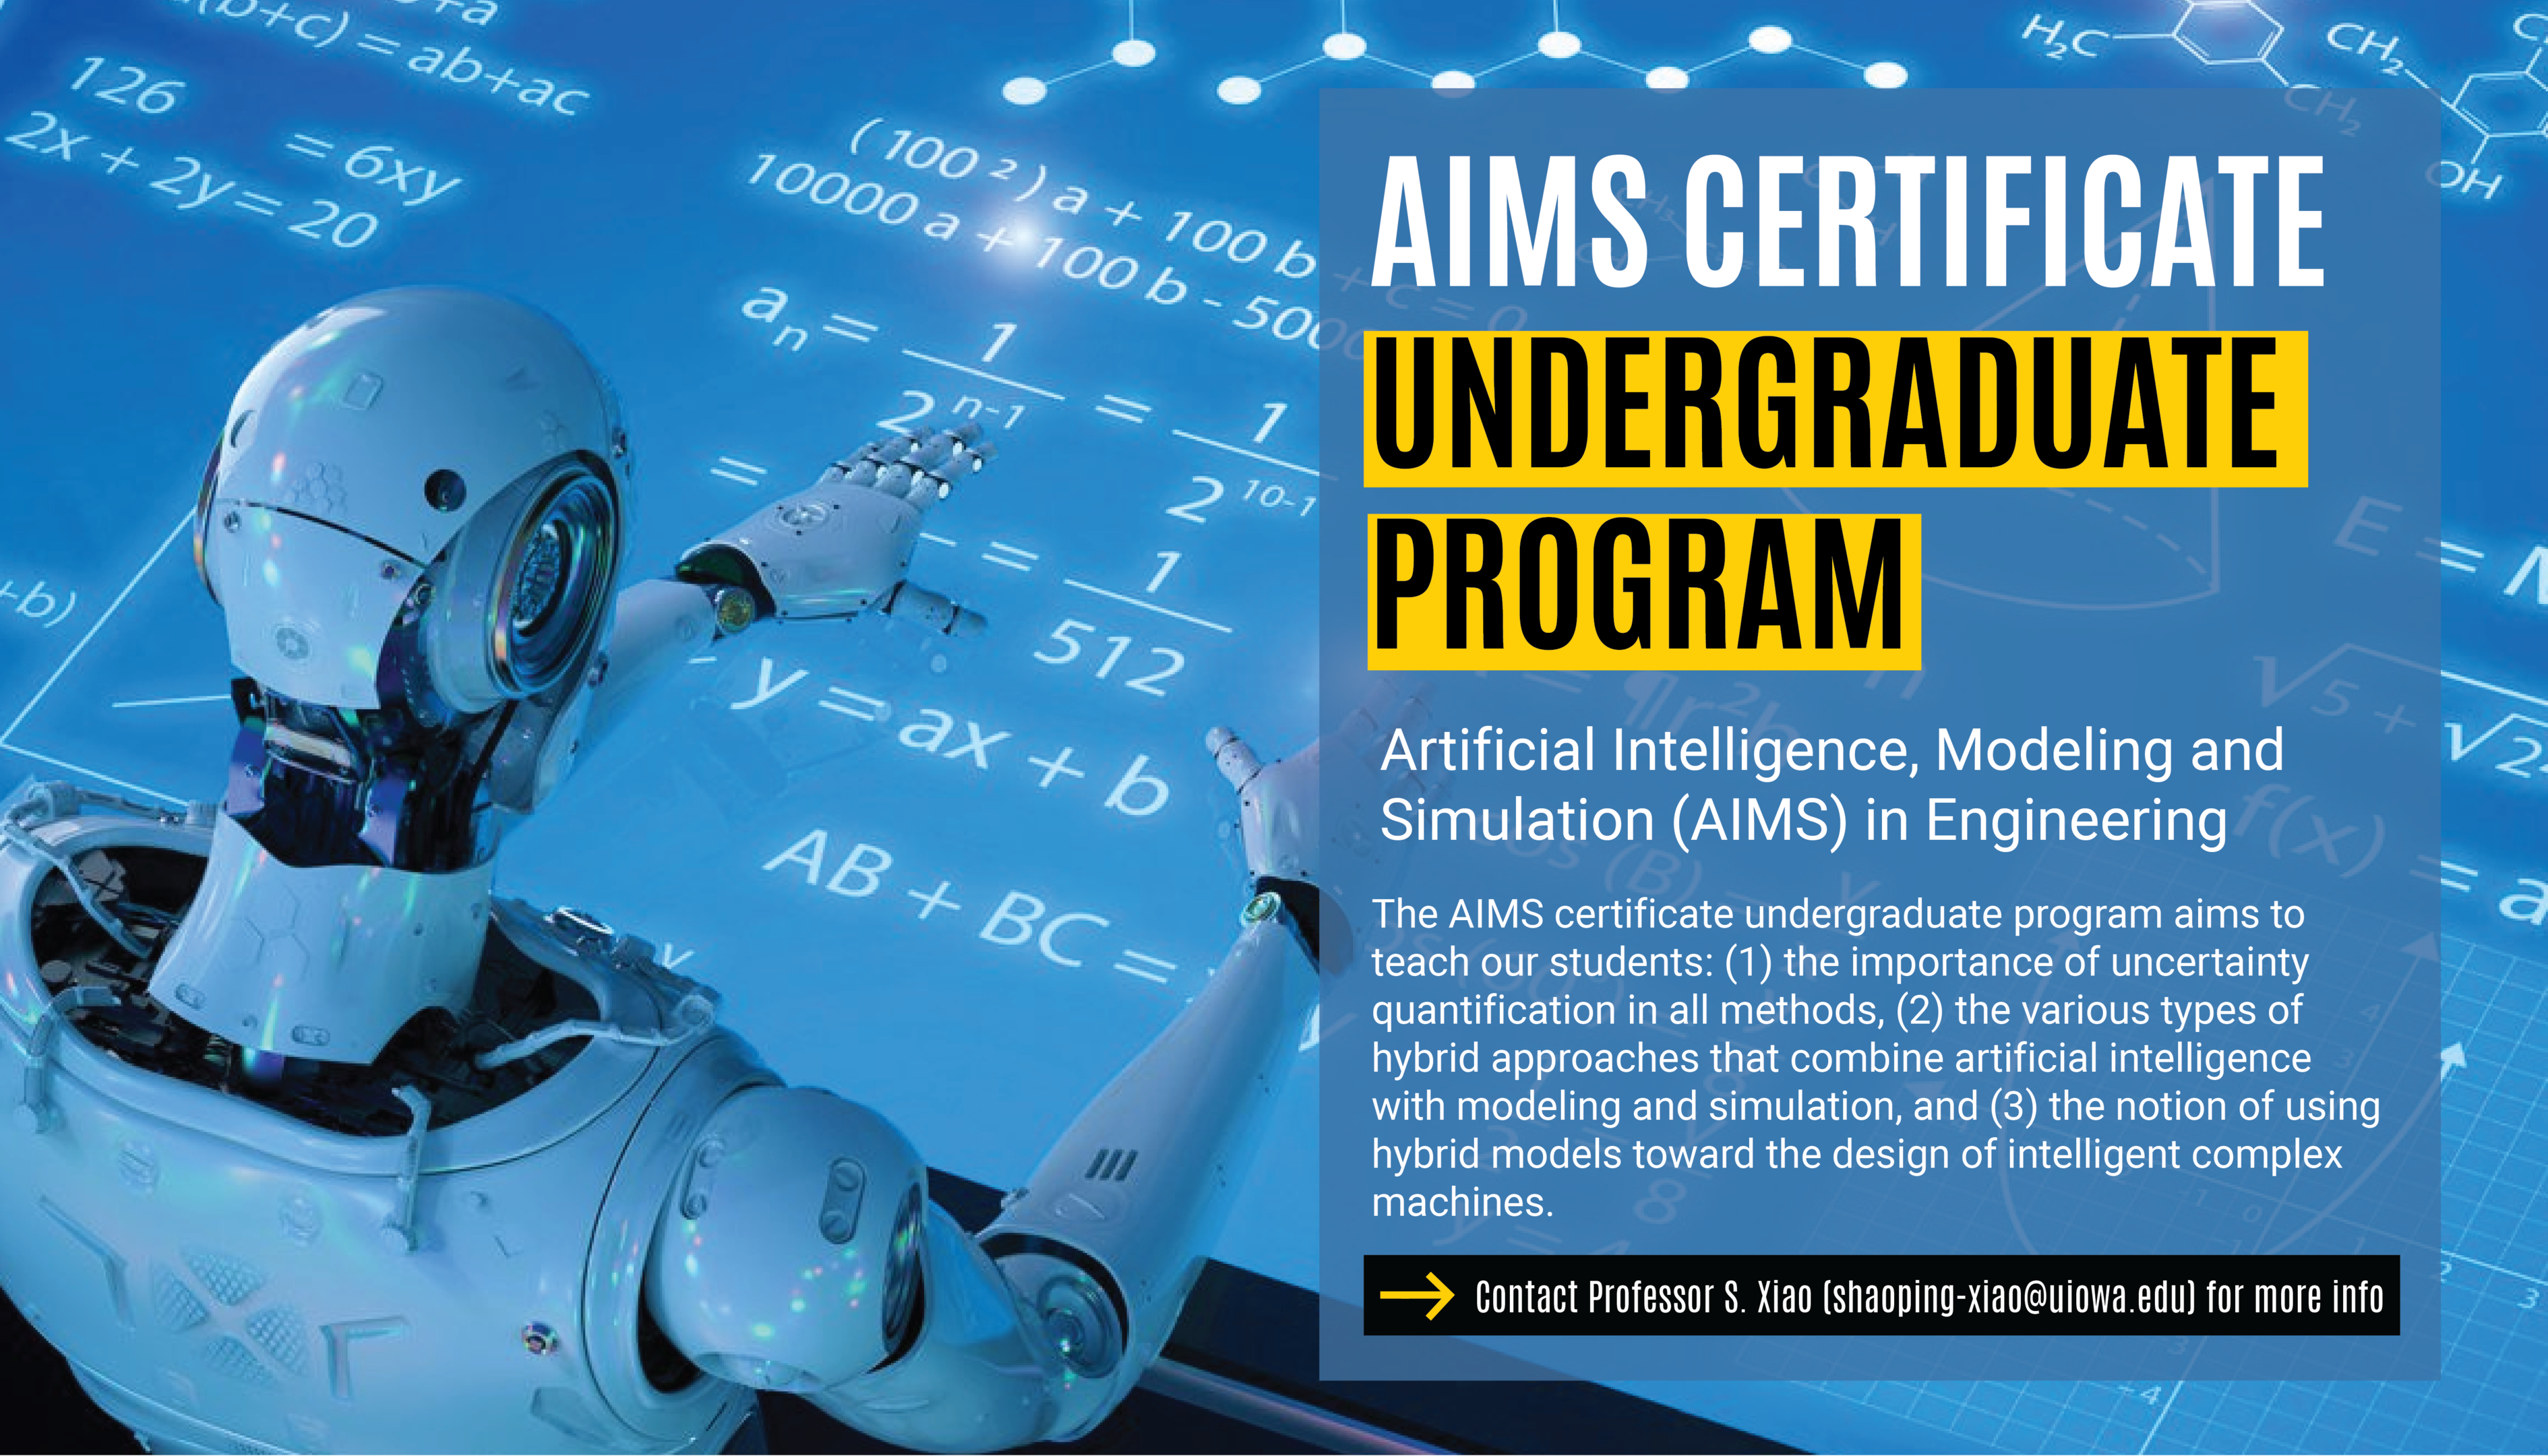 A look at the AIMS Undergraduate Certificate that is offered here at the University of Iowa